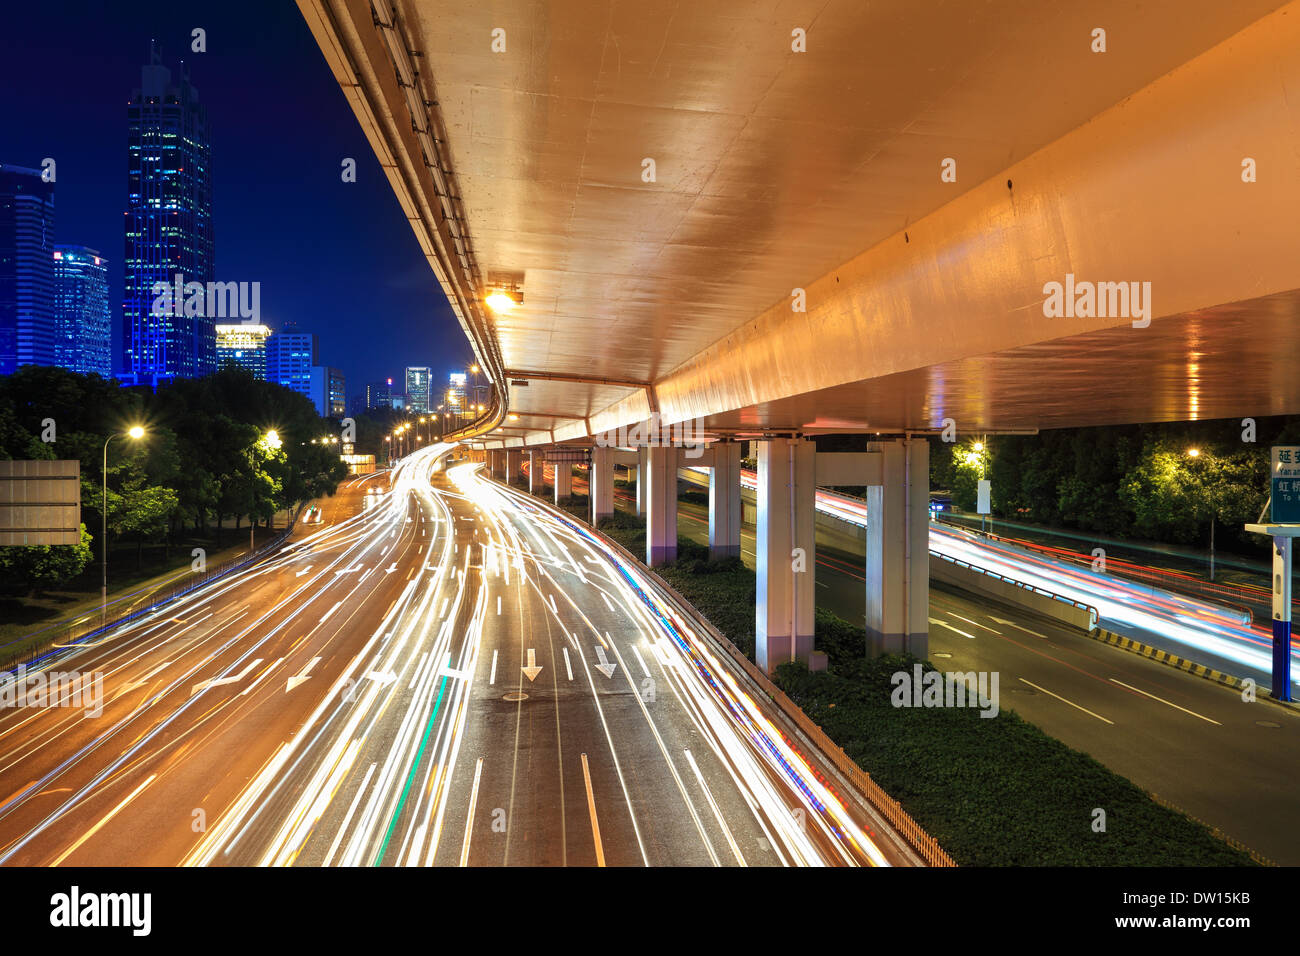 night viaduct with light trails Stock Photo